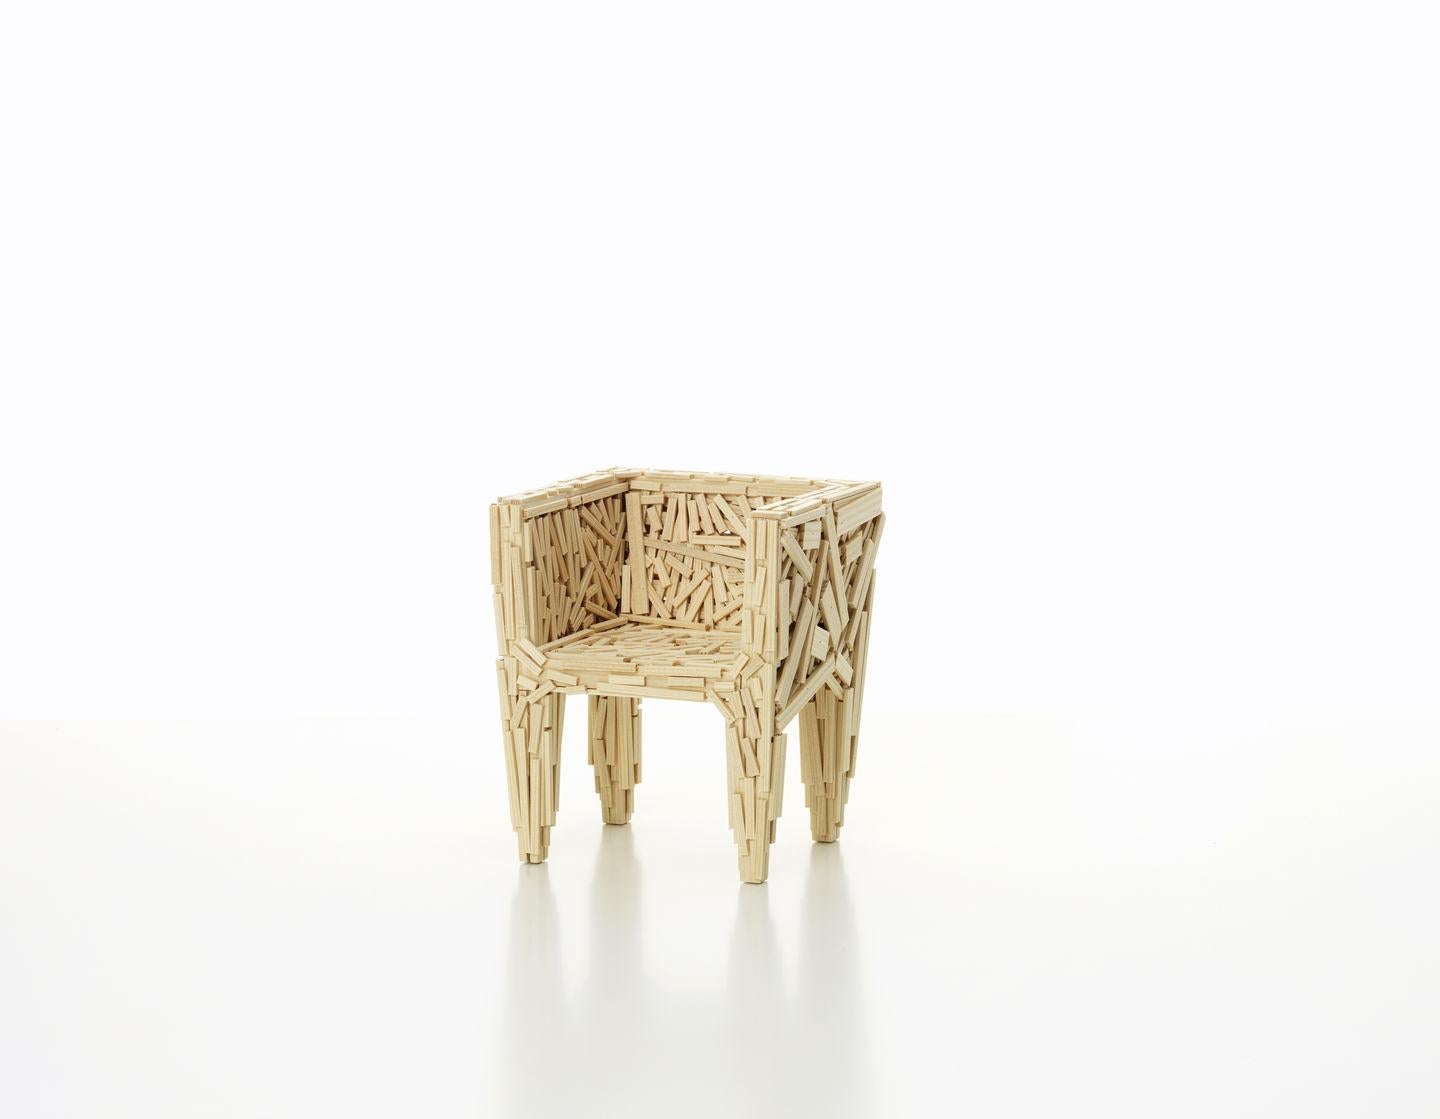 These items are only available in the United States.

The Favela armed chair is one of the most striking works by the Brazilian designers Fernando and Humberto Campana. According to a statement by the brothers, the architecture of the typical